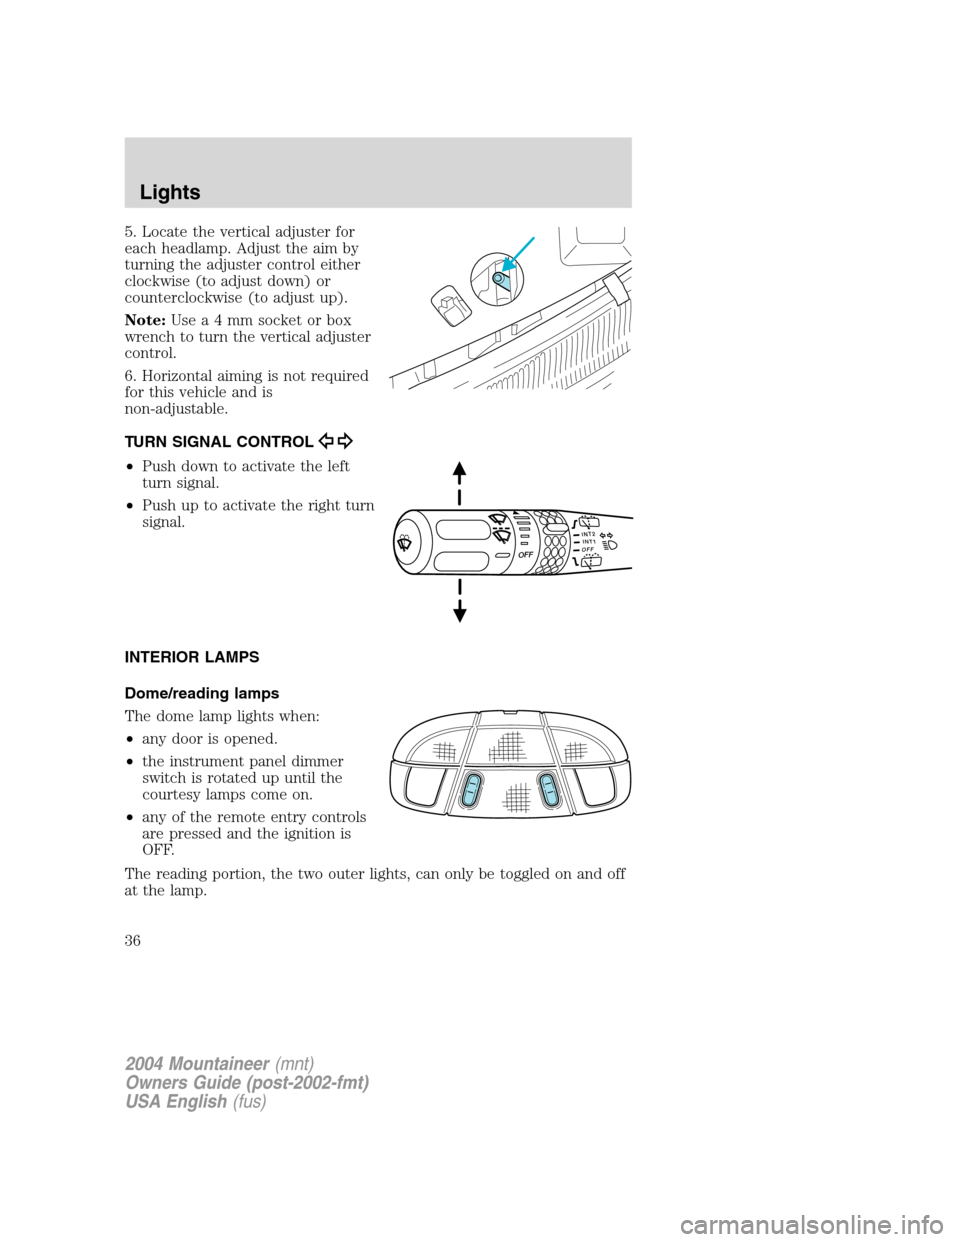 Mercury Mountaineer 2004  s Owners Guide 5. Locate the vertical adjuster for
each headlamp. Adjust the aim by
turning the adjuster control either
clockwise (to adjust down) or
counterclockwise (to adjust up).
Note:Usea4mmsocket or box
wrench